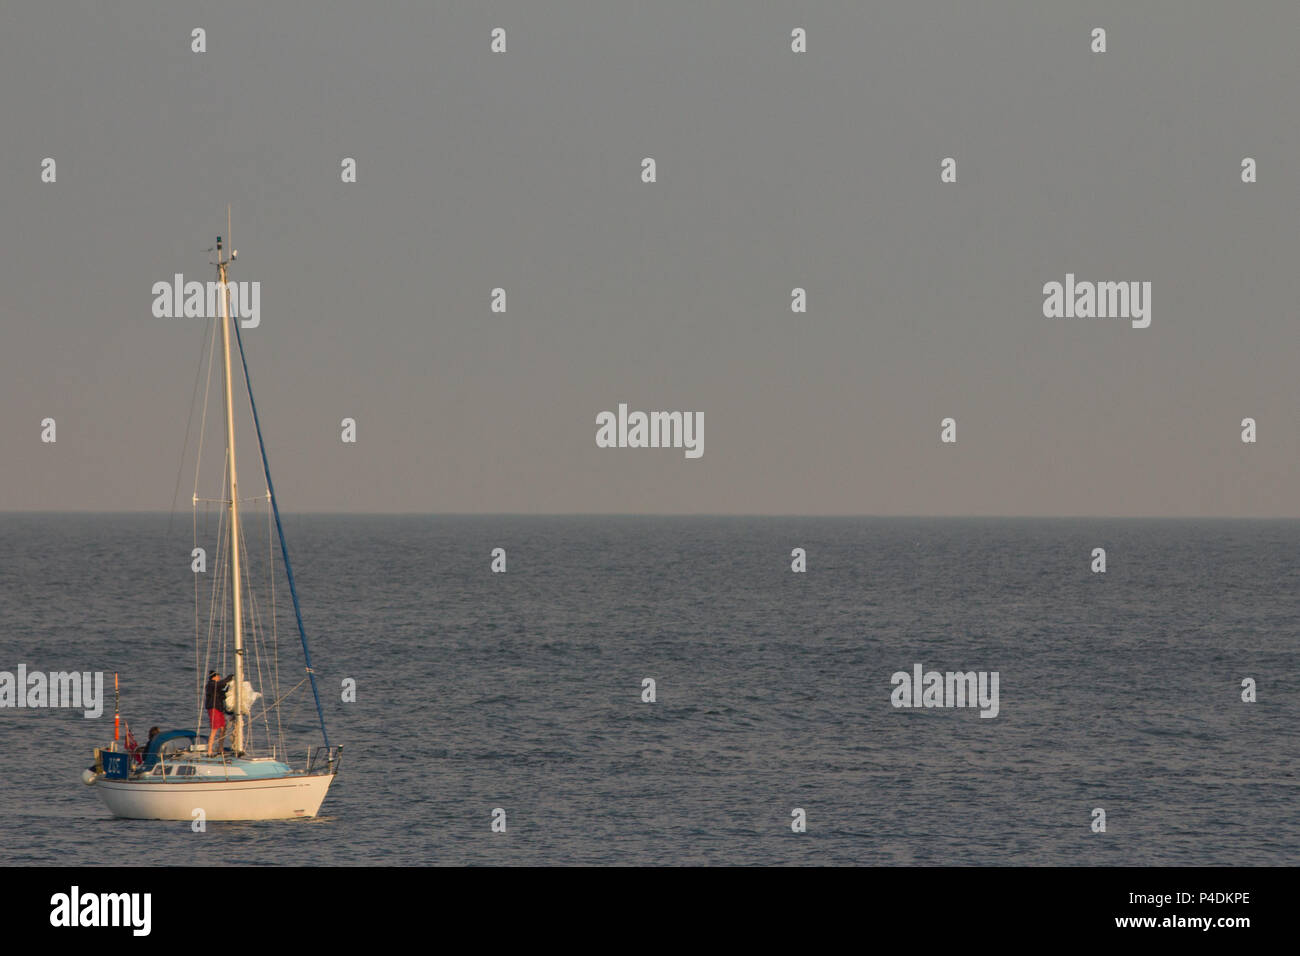 A small blue and white yacht preparing to raise its mainsheet in the early morning light Stock Photo